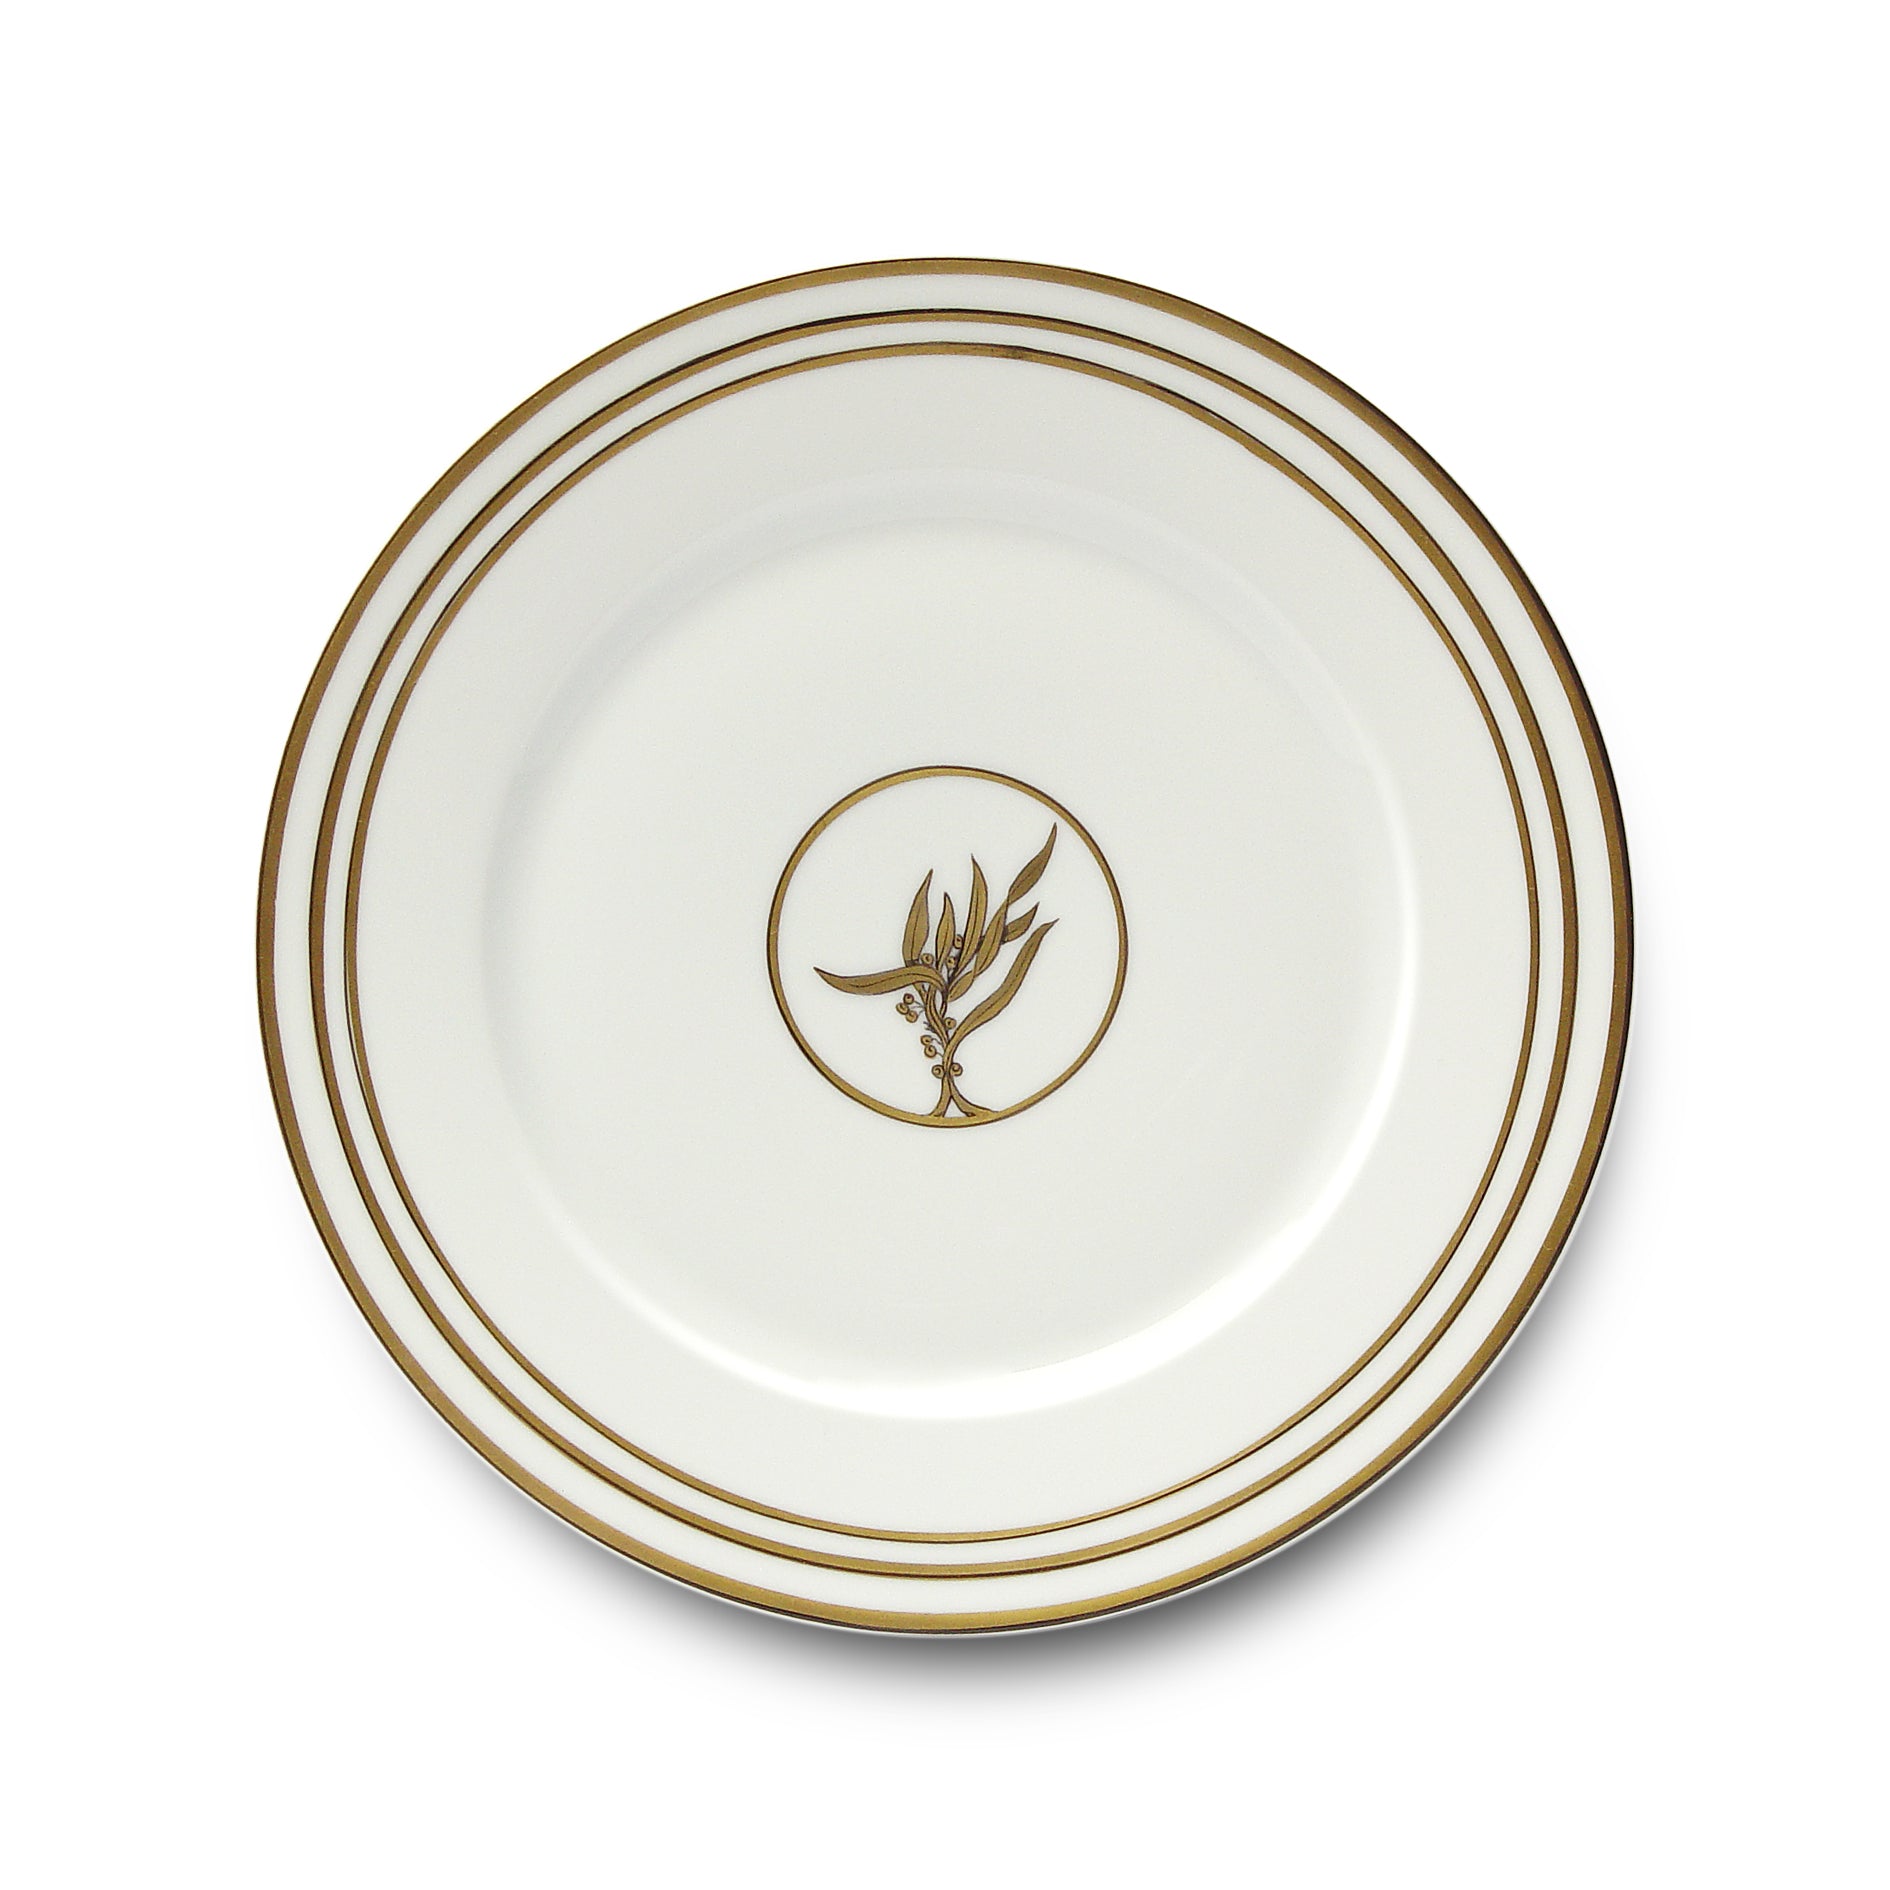 Or des Airs - Or des Mers - Dinner plate 04